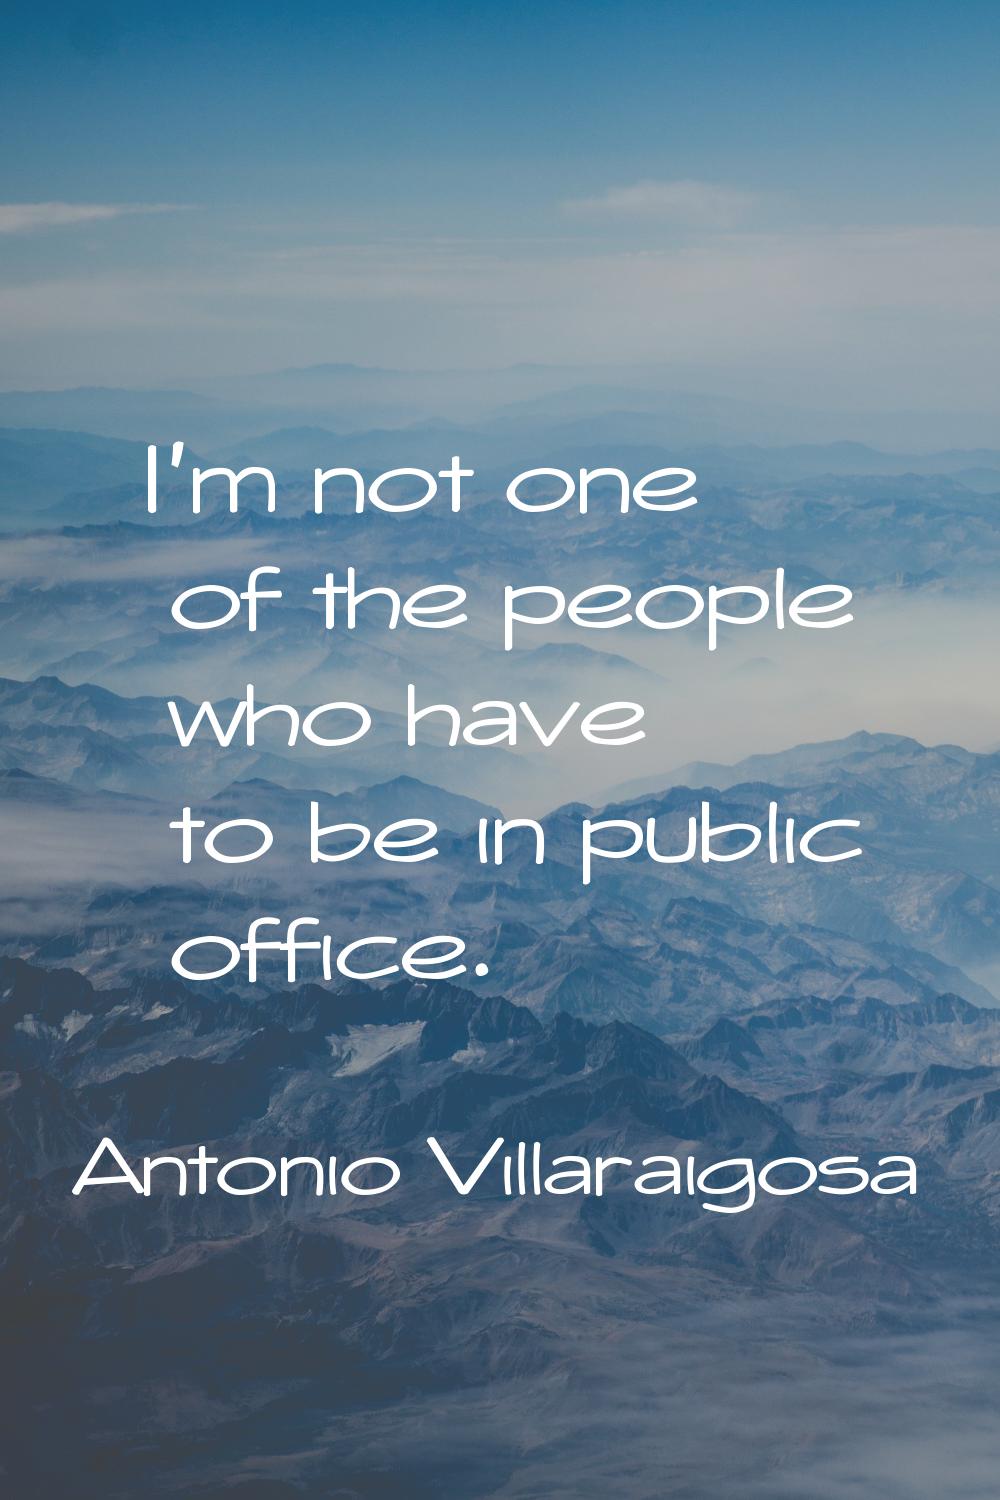 I'm not one of the people who have to be in public office.